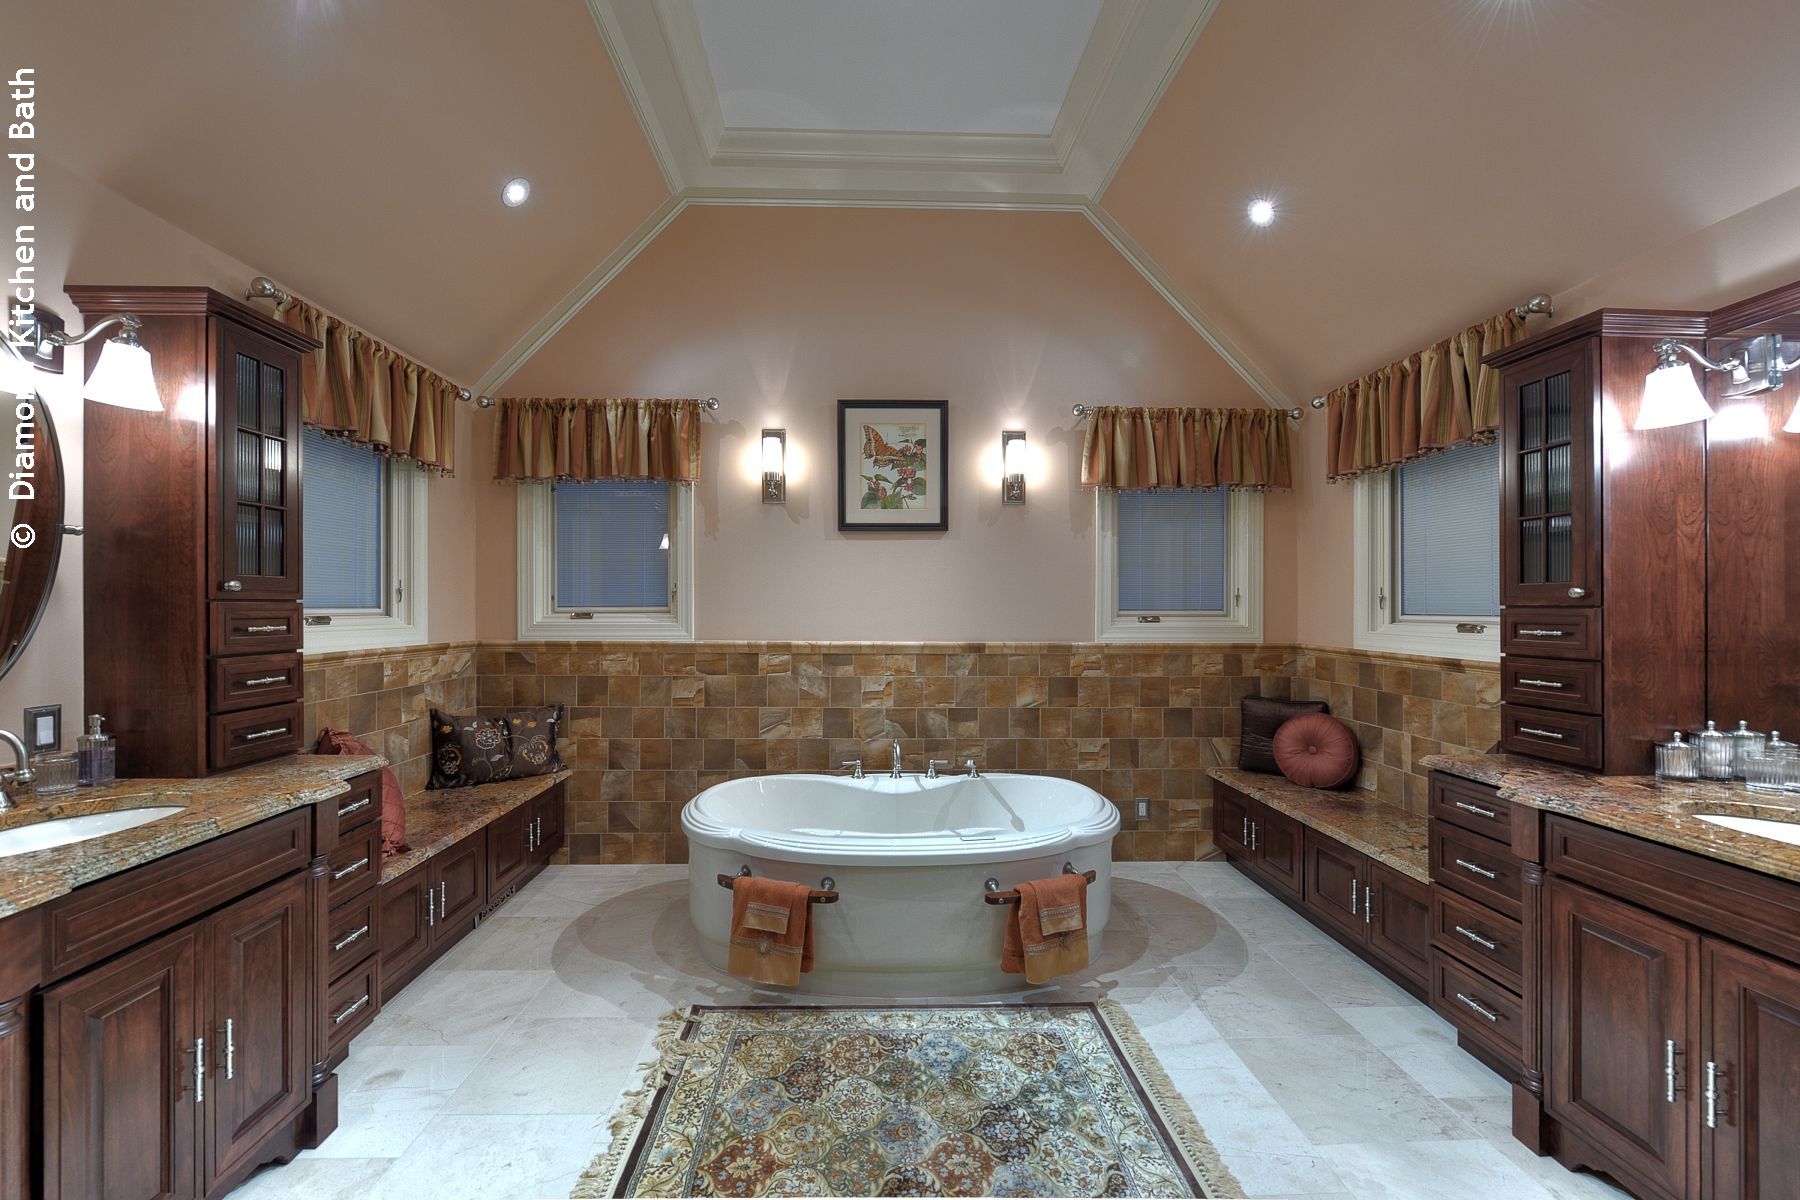 Bathroom Remodeling Virtual Tour in Newtown, PA